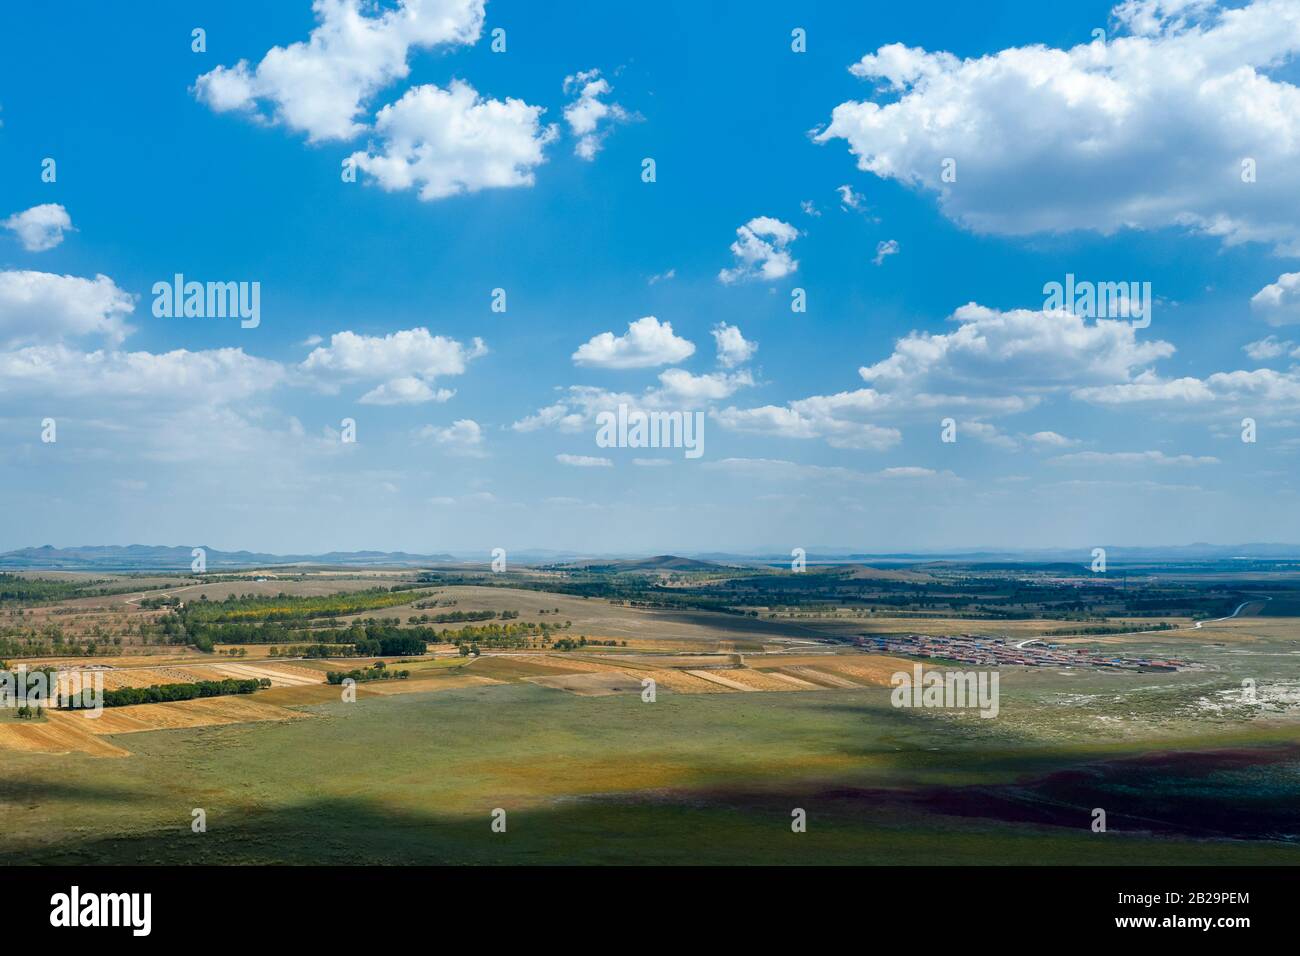 Steppe with trees and buildings, Taipusi Banner, Inner Mongolia, China Stock Photo